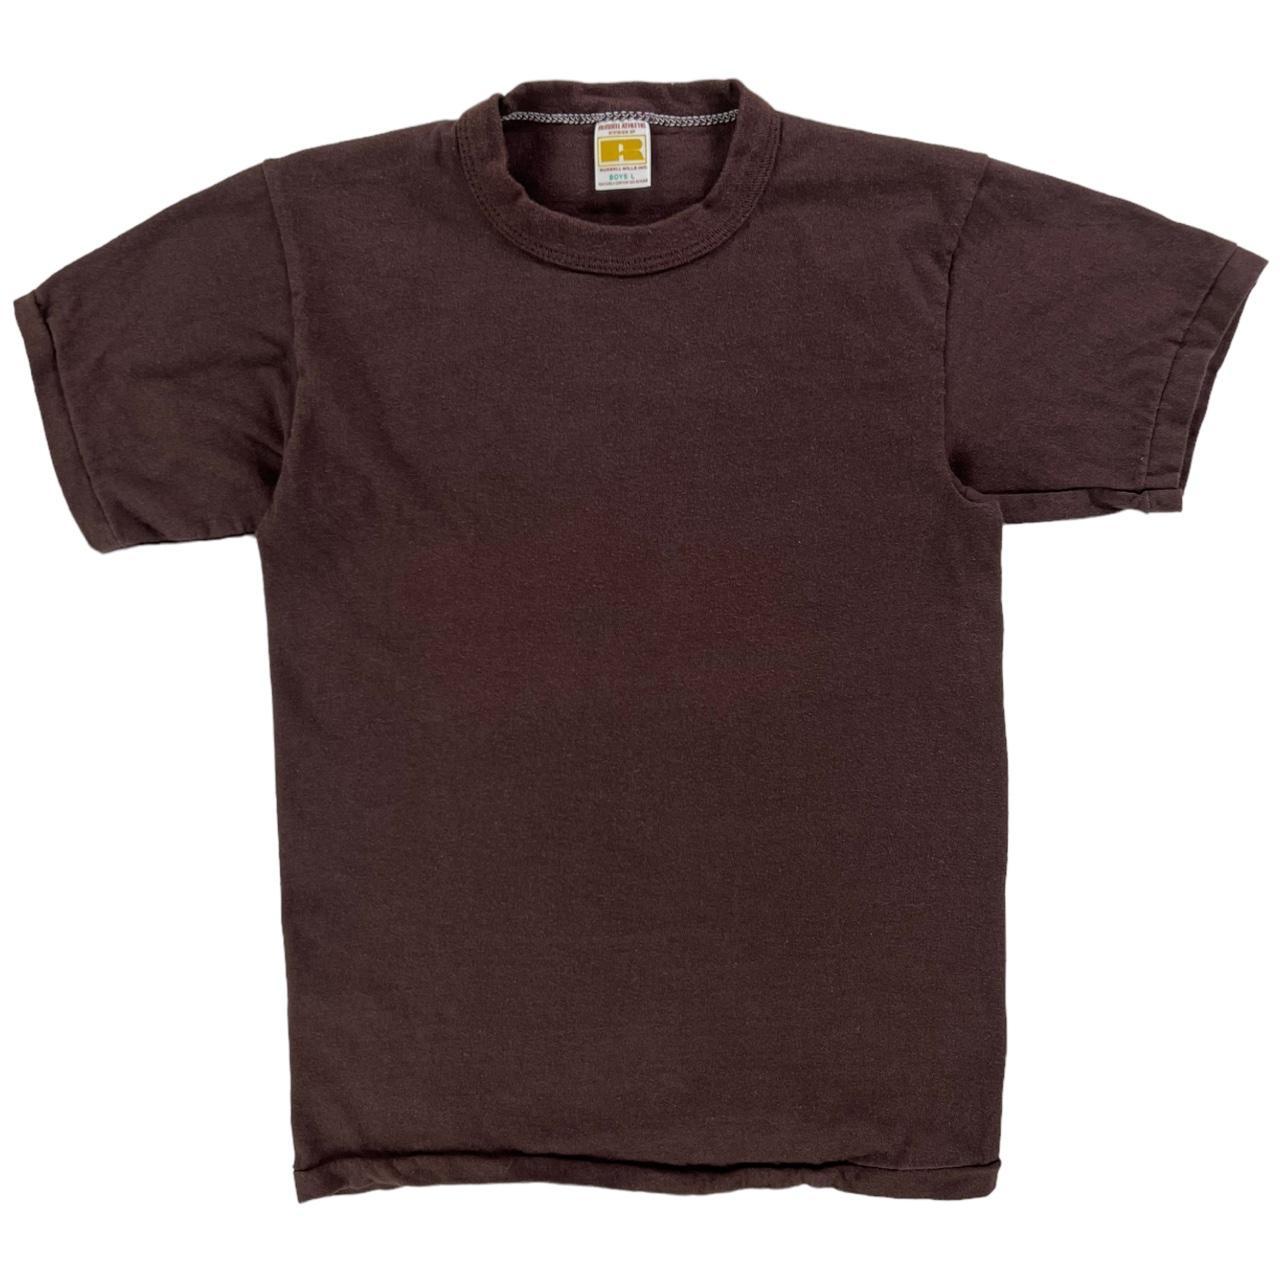 Russell Athletic Brown T-shirt | Depop